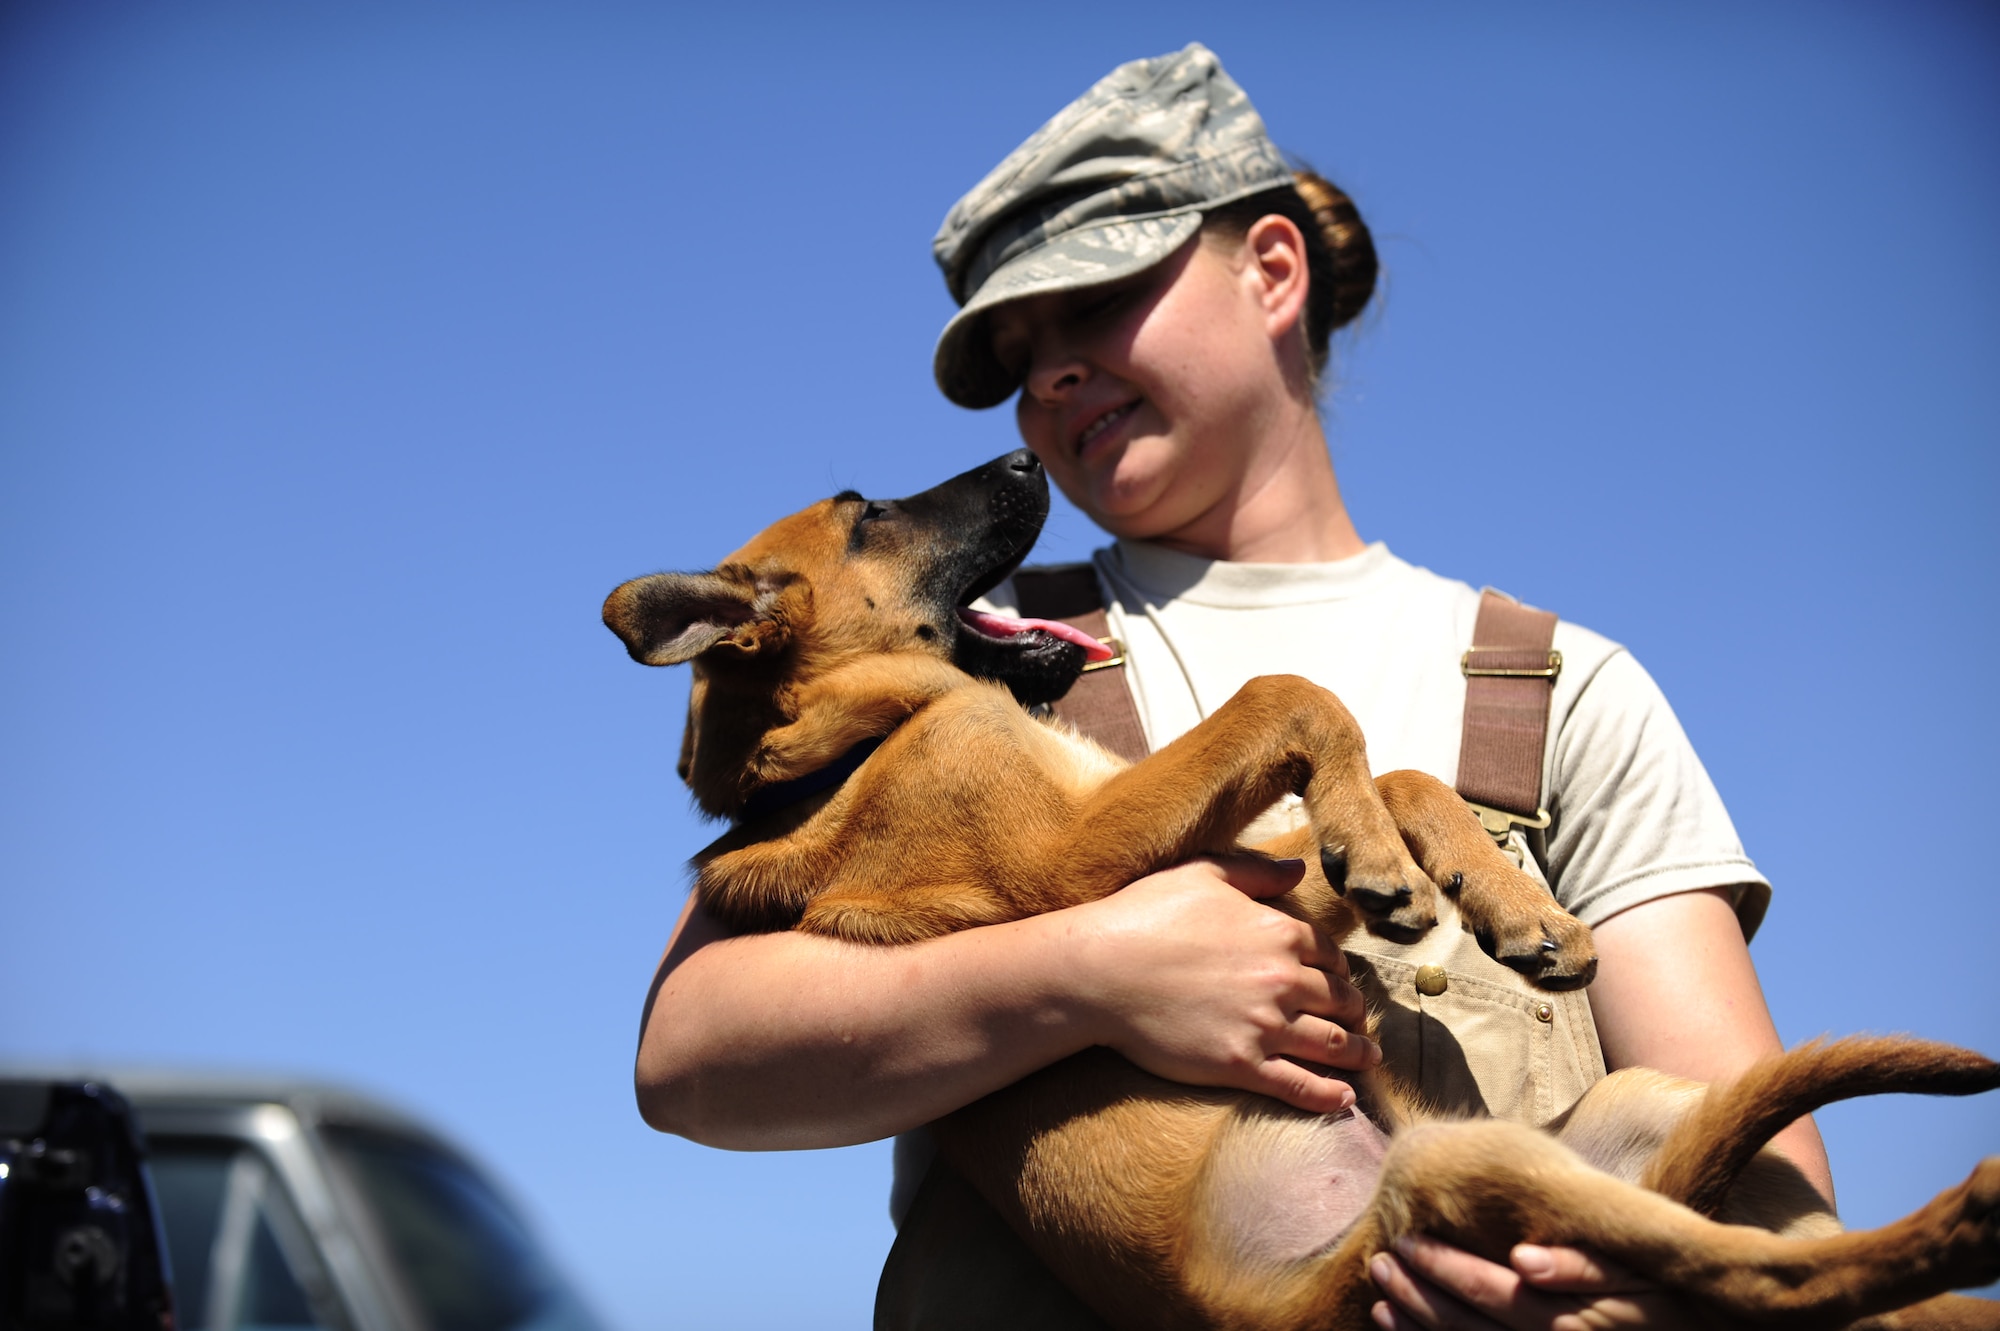 Staff Sgt. Christa Quam holds her puppy which will enter the military working dog program in a year at Lackland Air Force Base, Texas. MWDs are enrolled in a 60- to 90-day training program where they are taught to detect explosives and drugs. They are also taught deterrence training and how to protect their handler. Sergeant Quam is assigned to the 341st Training Squadron at Lackland AFB. (U.S. Air Force photo/Senior Airman Christopher Griffin)